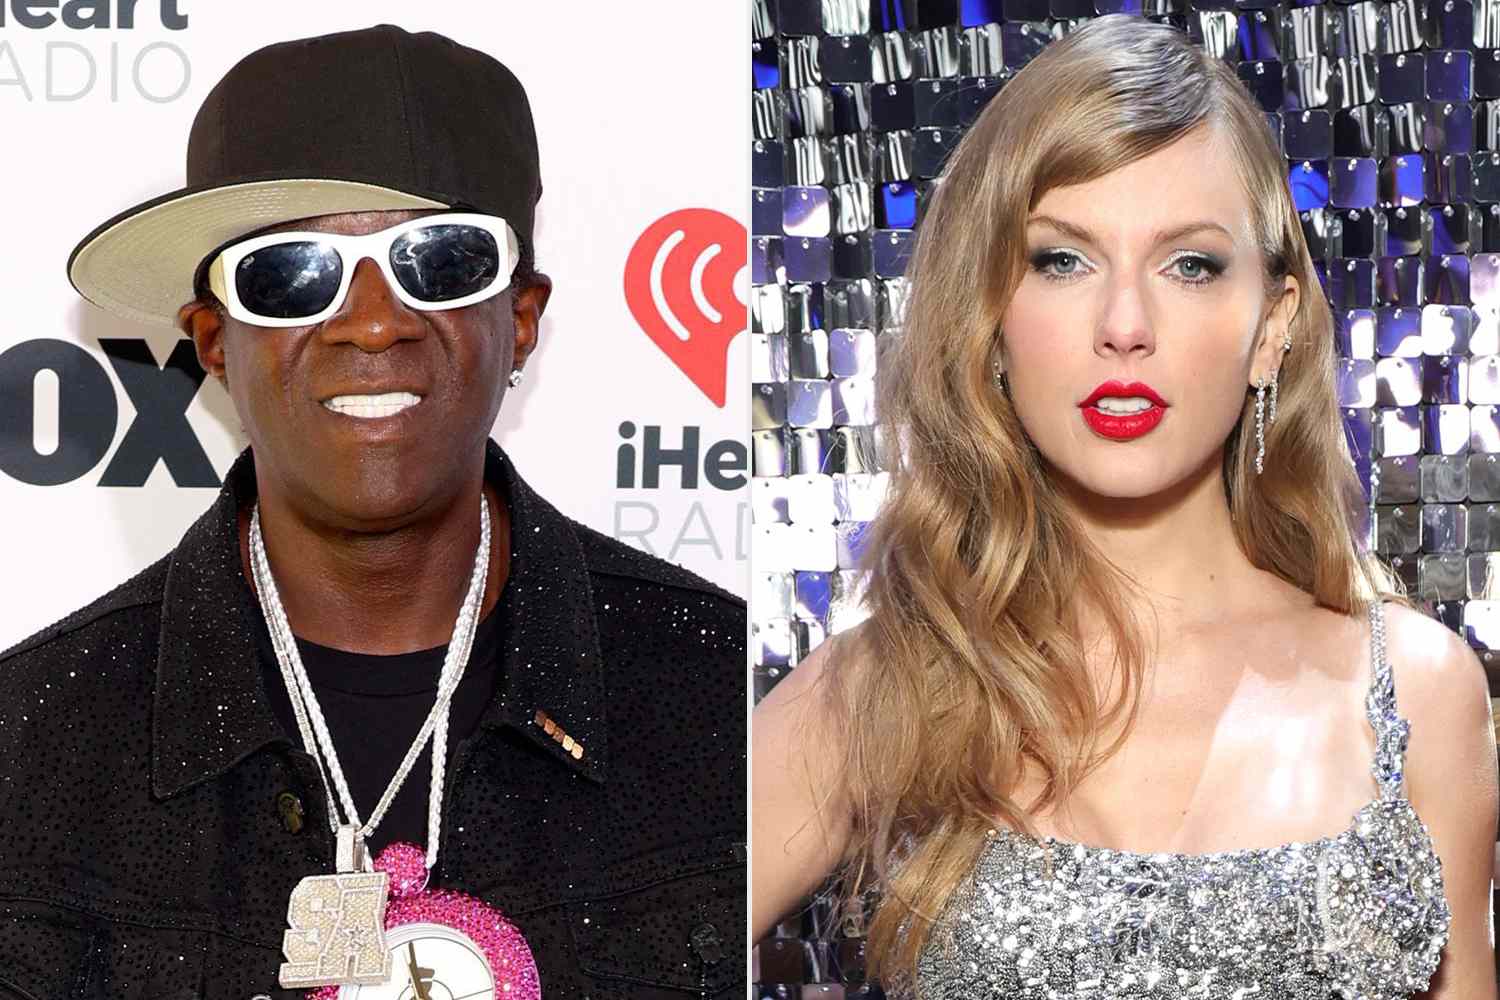 Taylor Swift Gives 'King Swiftie' Flavor Flav a Shout-Out from the Stage During Eras Tour Stop in Hamburg